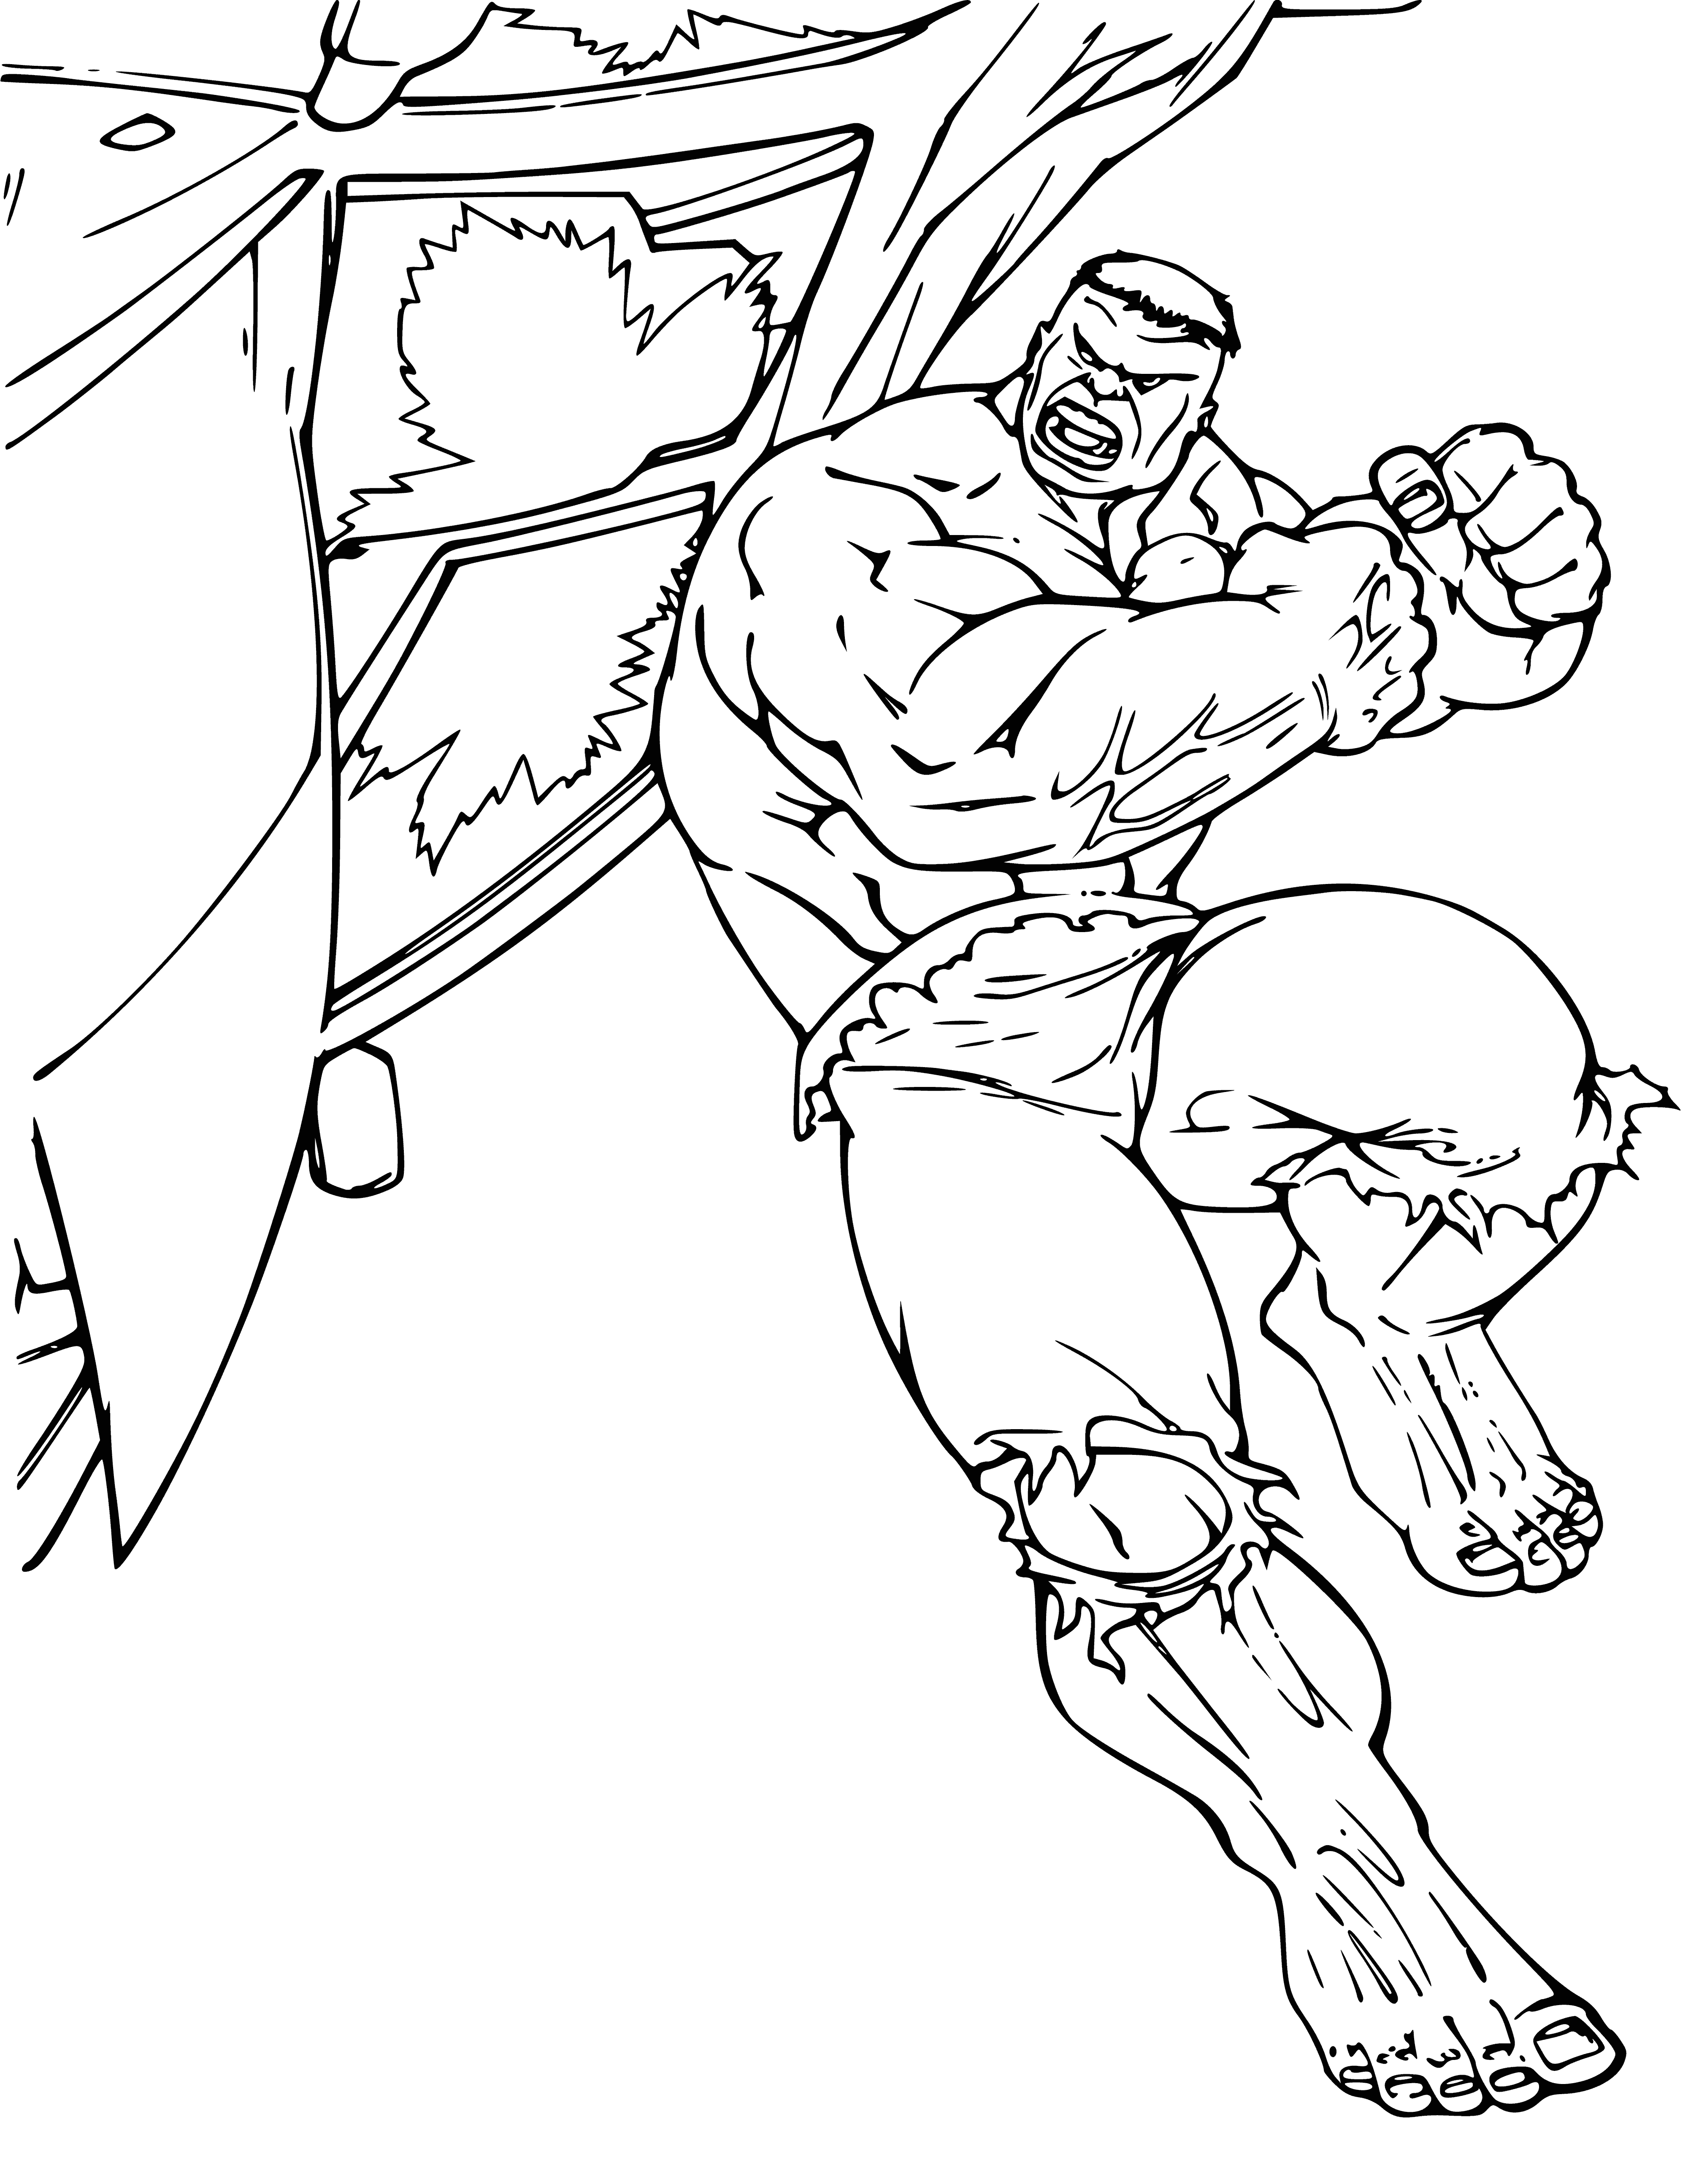 coloring page: Green-skinned, muscular, shirtless man with ripped pants, glowing eyes, protruding forehead, short black hair & pointy ears yells loudly.